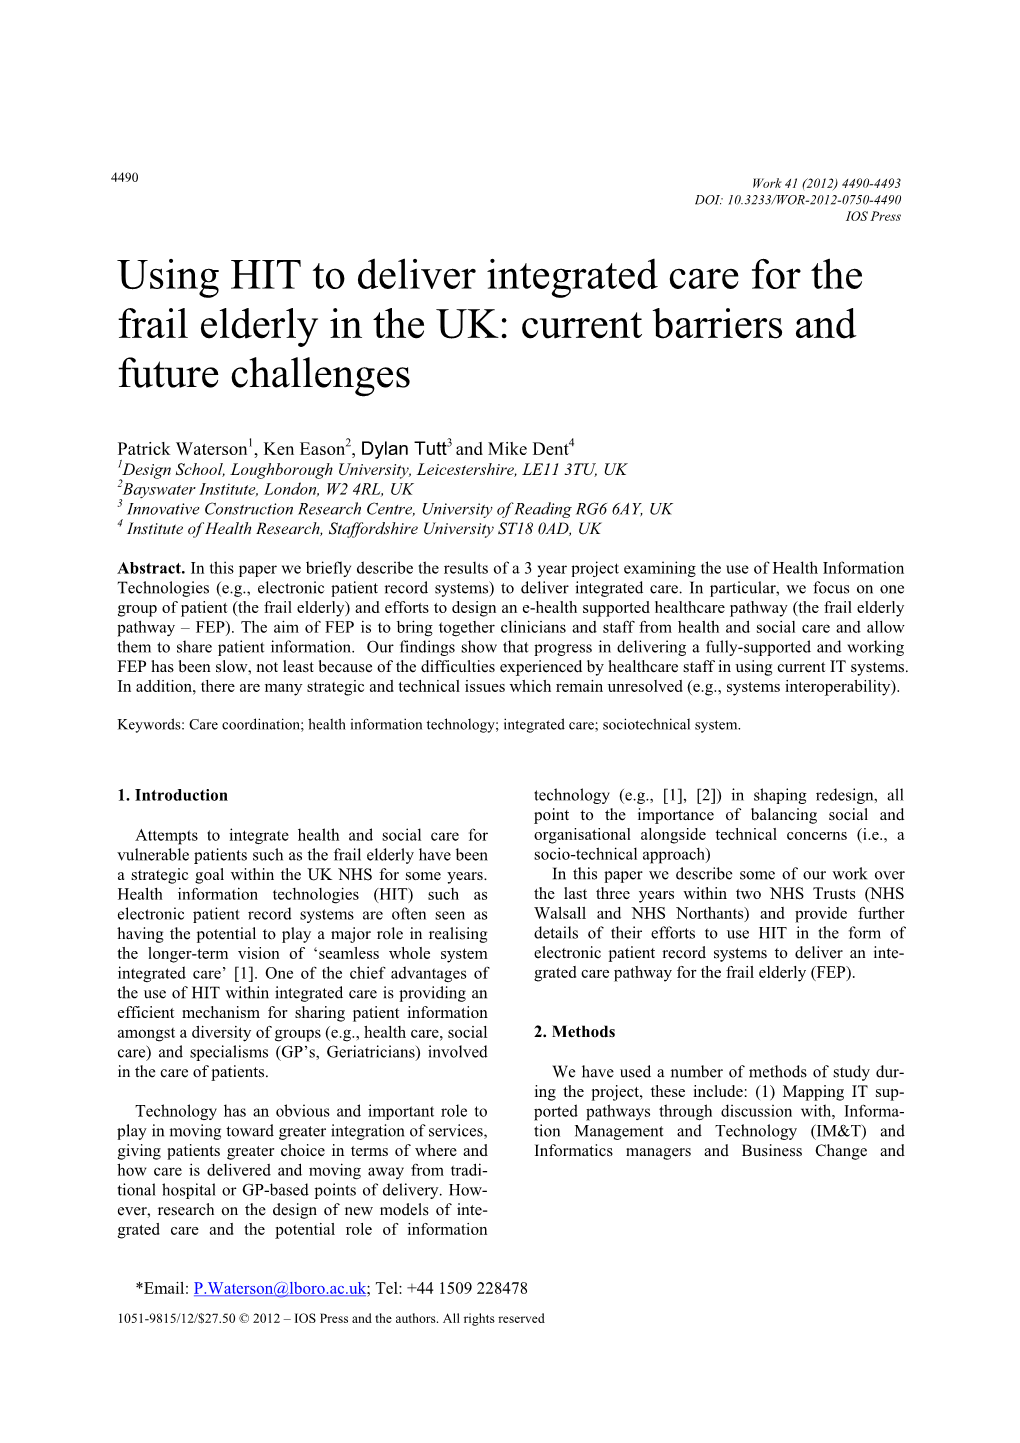 Using HIT to Deliver Integrated Care for the Frail Elderly in the UK: Current Barriers and Future Challenges